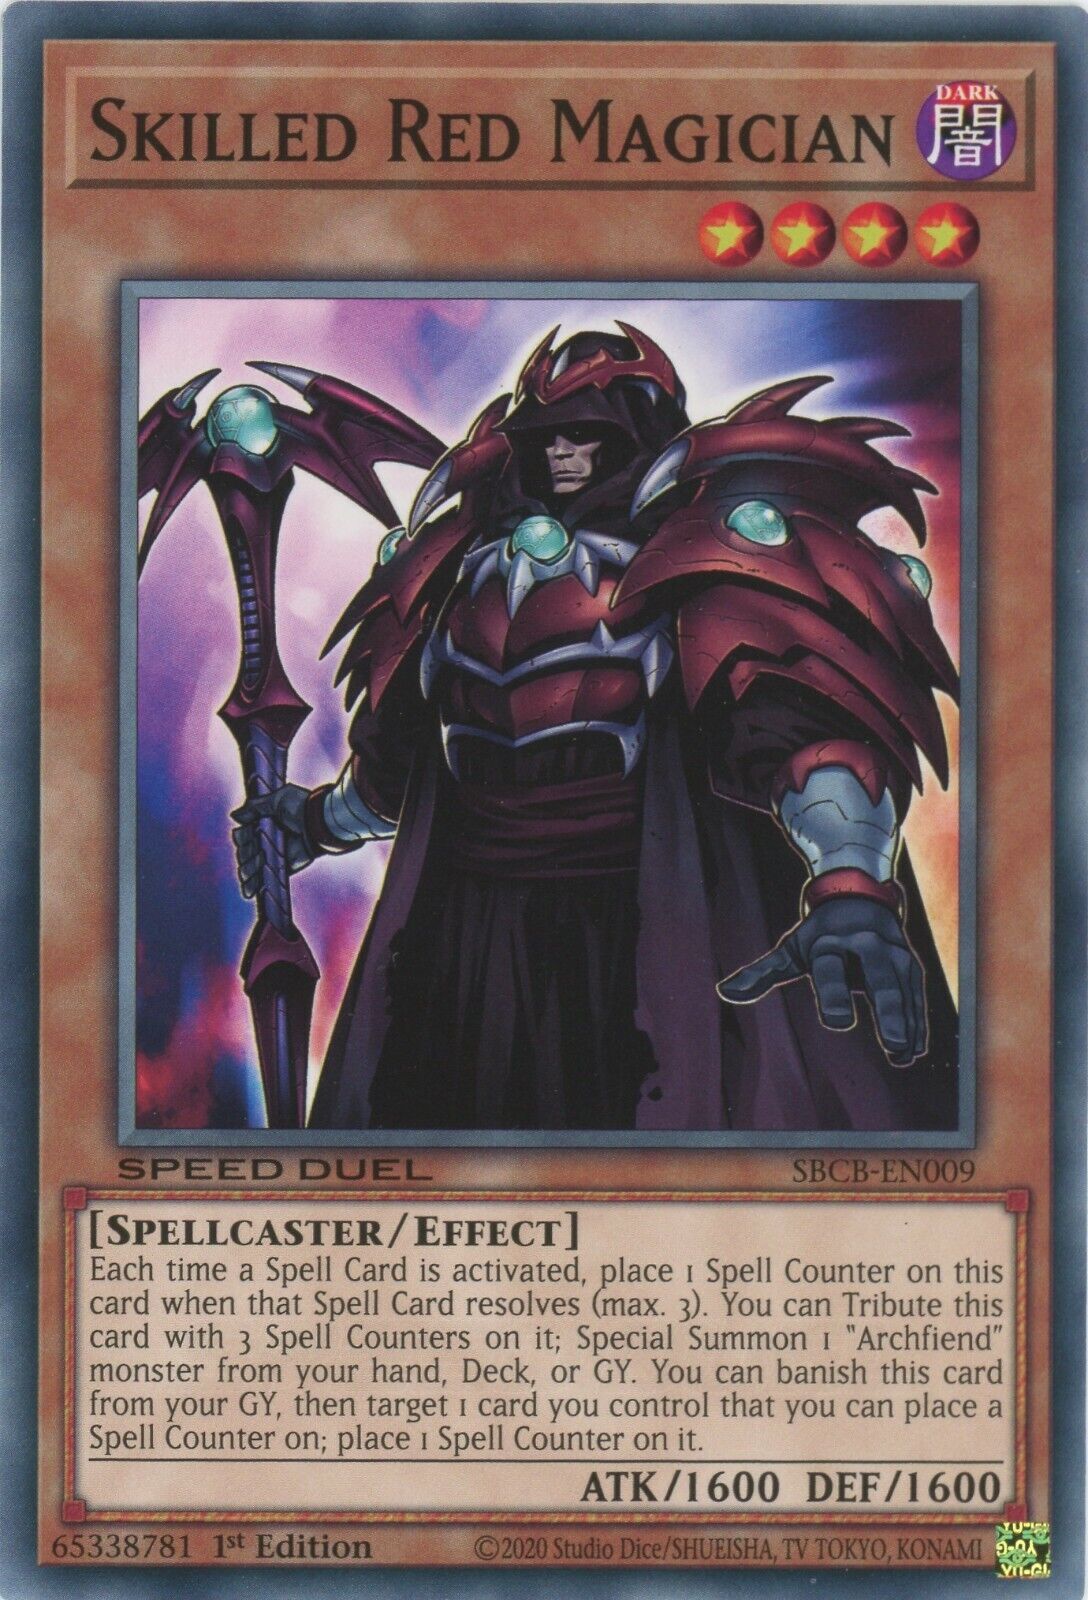 Yugioh Skilled Red Magician SBCB-EN009 Common Speed Duel Mint Condition x3 